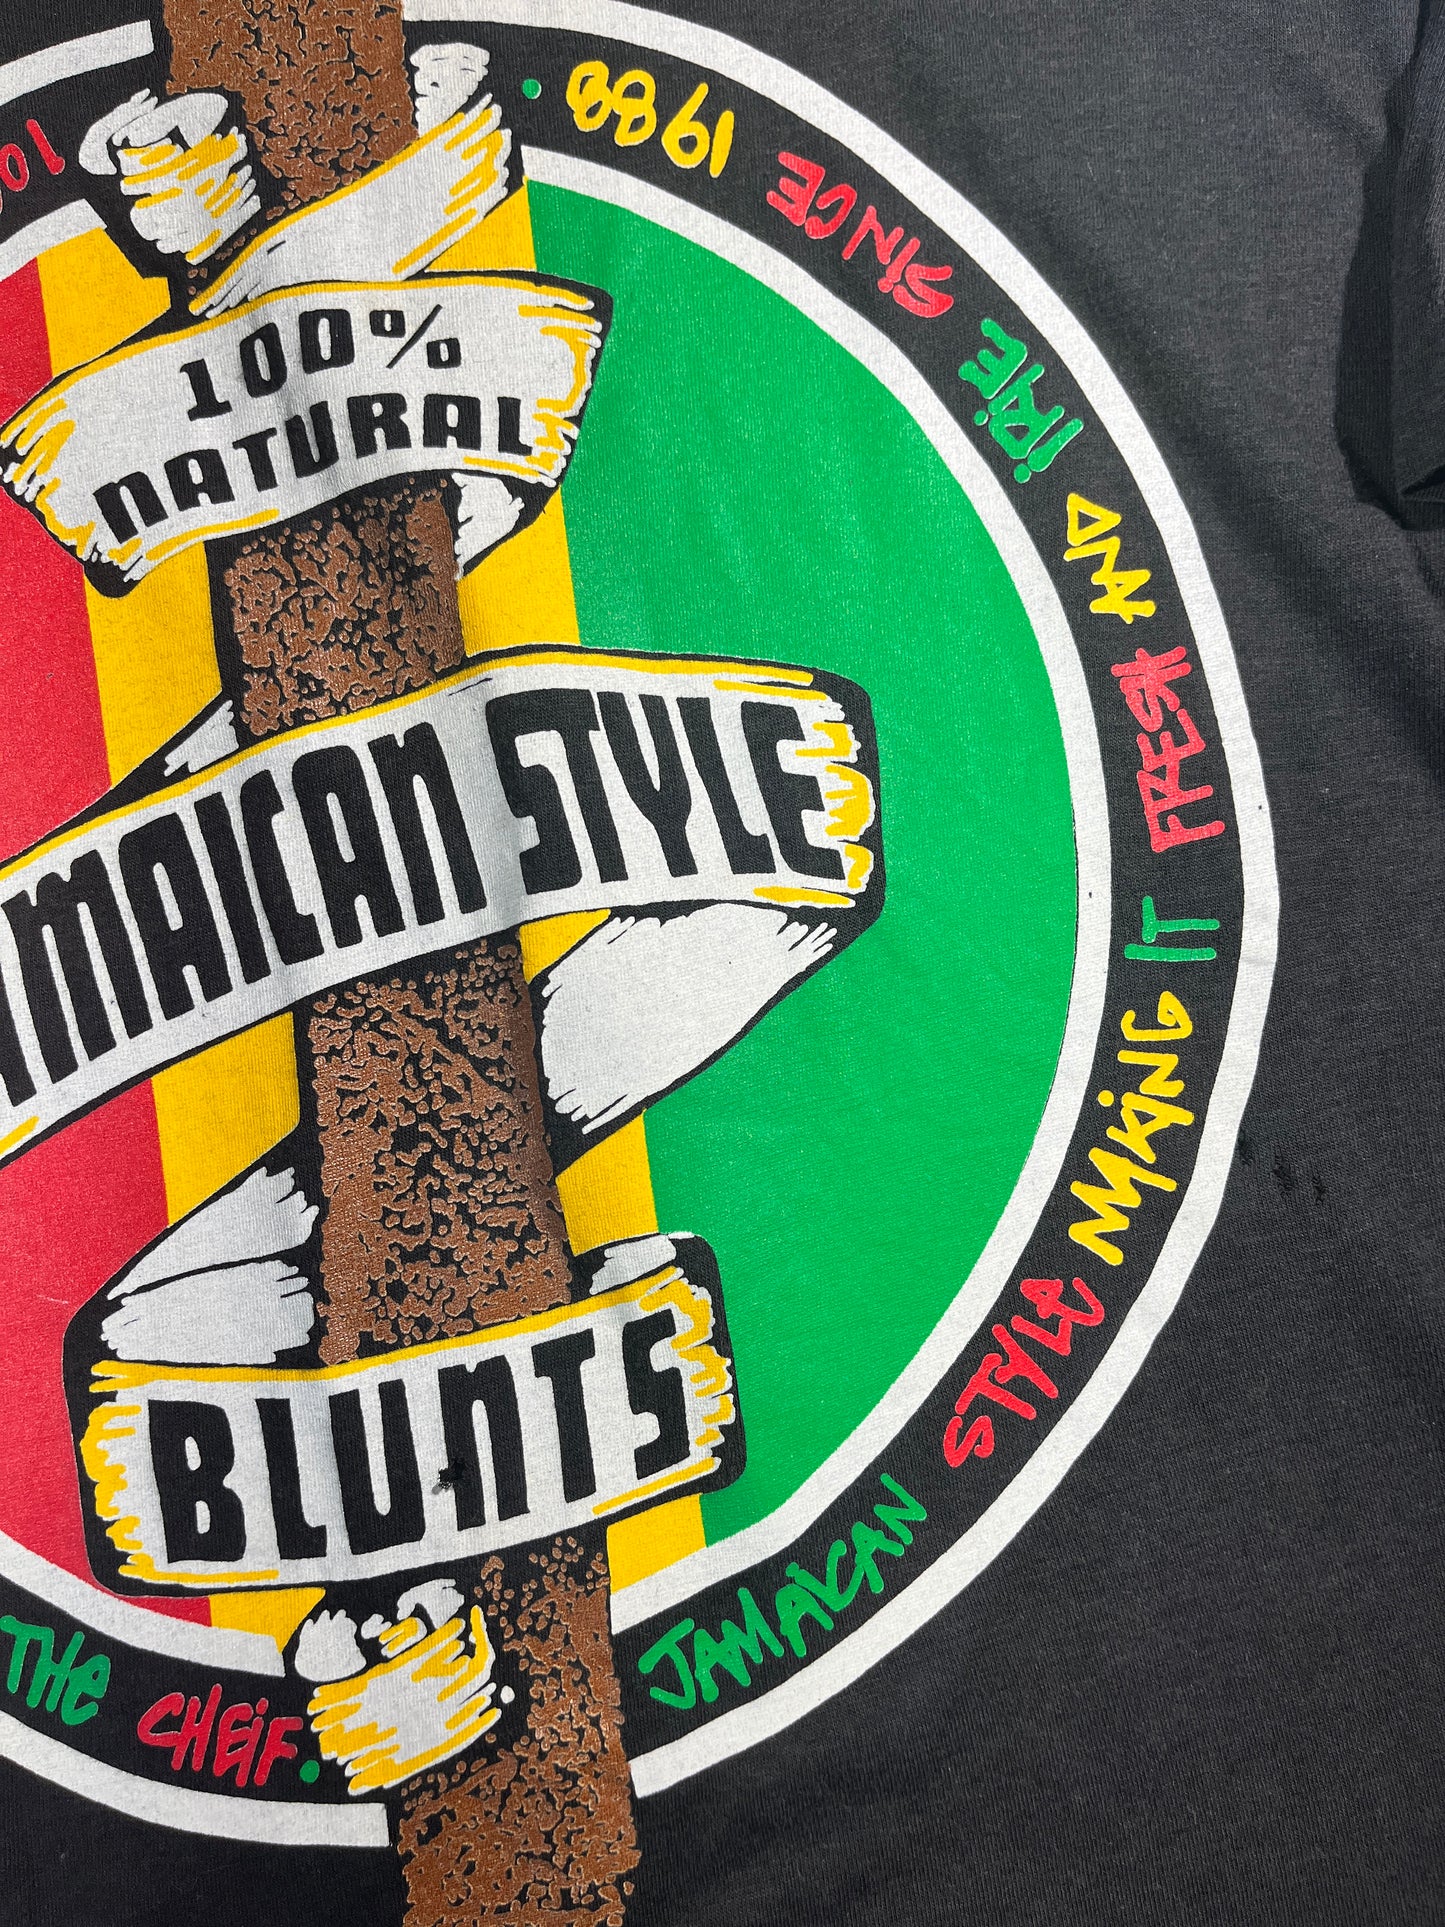 Vintage Blunt T-Shirt 100% Natural Jamaican Style Blunts Weed Irie 1980 Single Stitch Thin